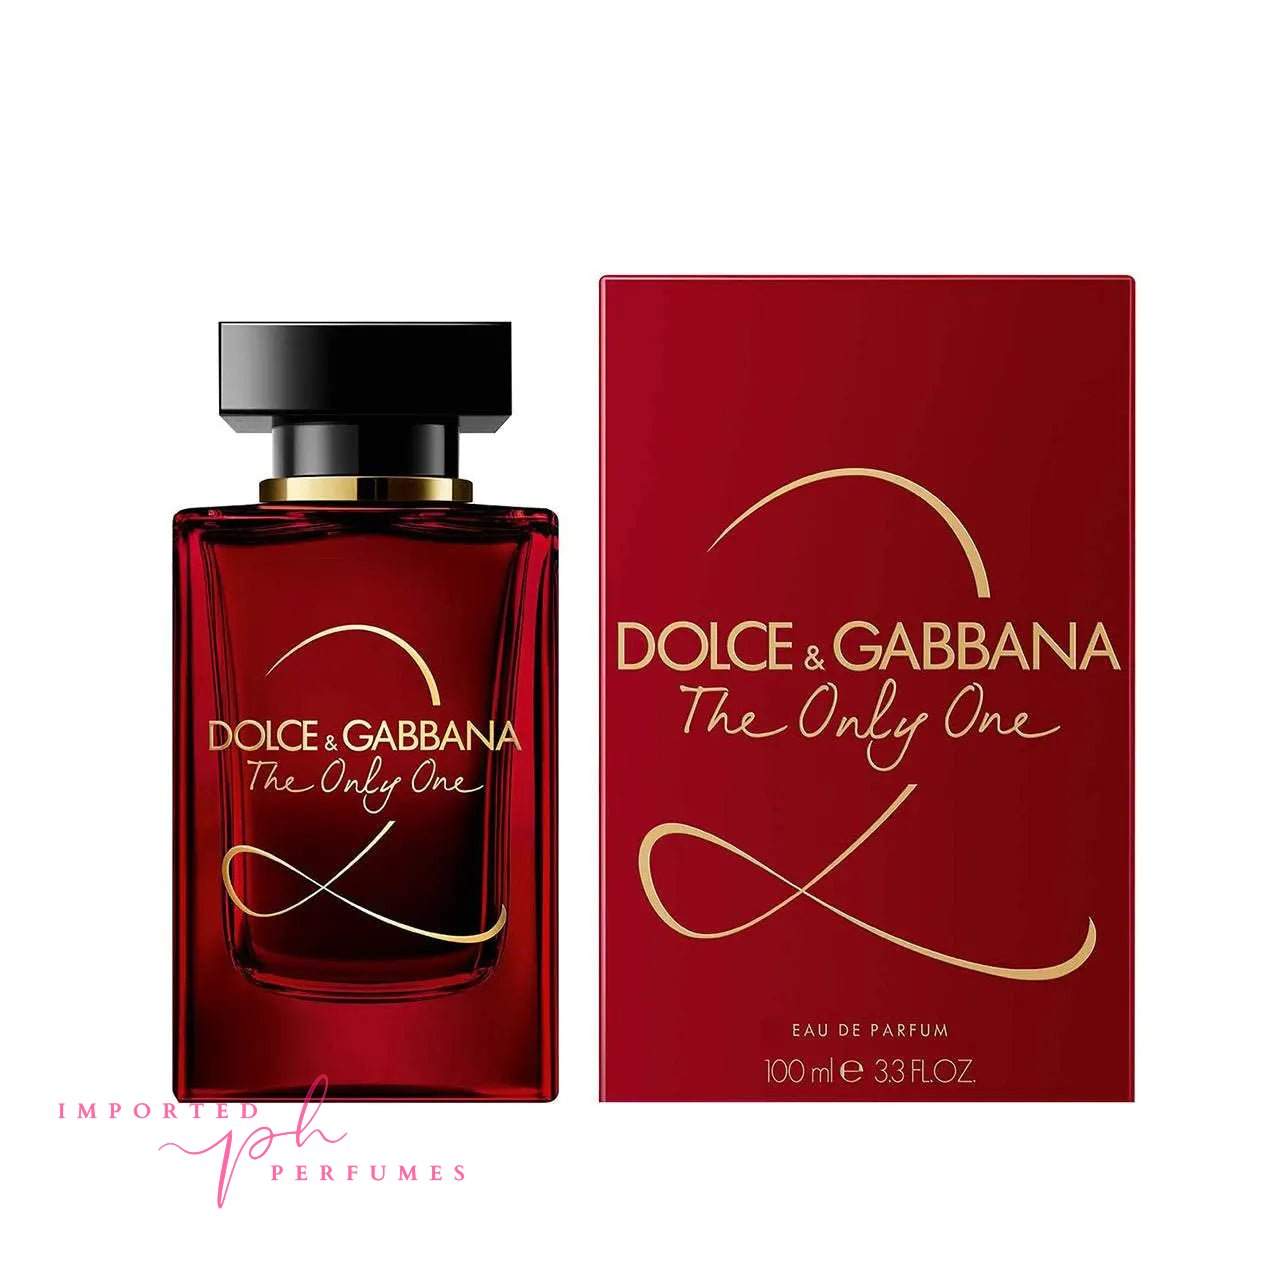 [TESTER] Dolce & Gabbana The Only One 2 Eau De Parfum 100ml Women-Imported Perfumes Co-2,Dolce,Dolce & Gabbana,test,TESTER,the only one 2